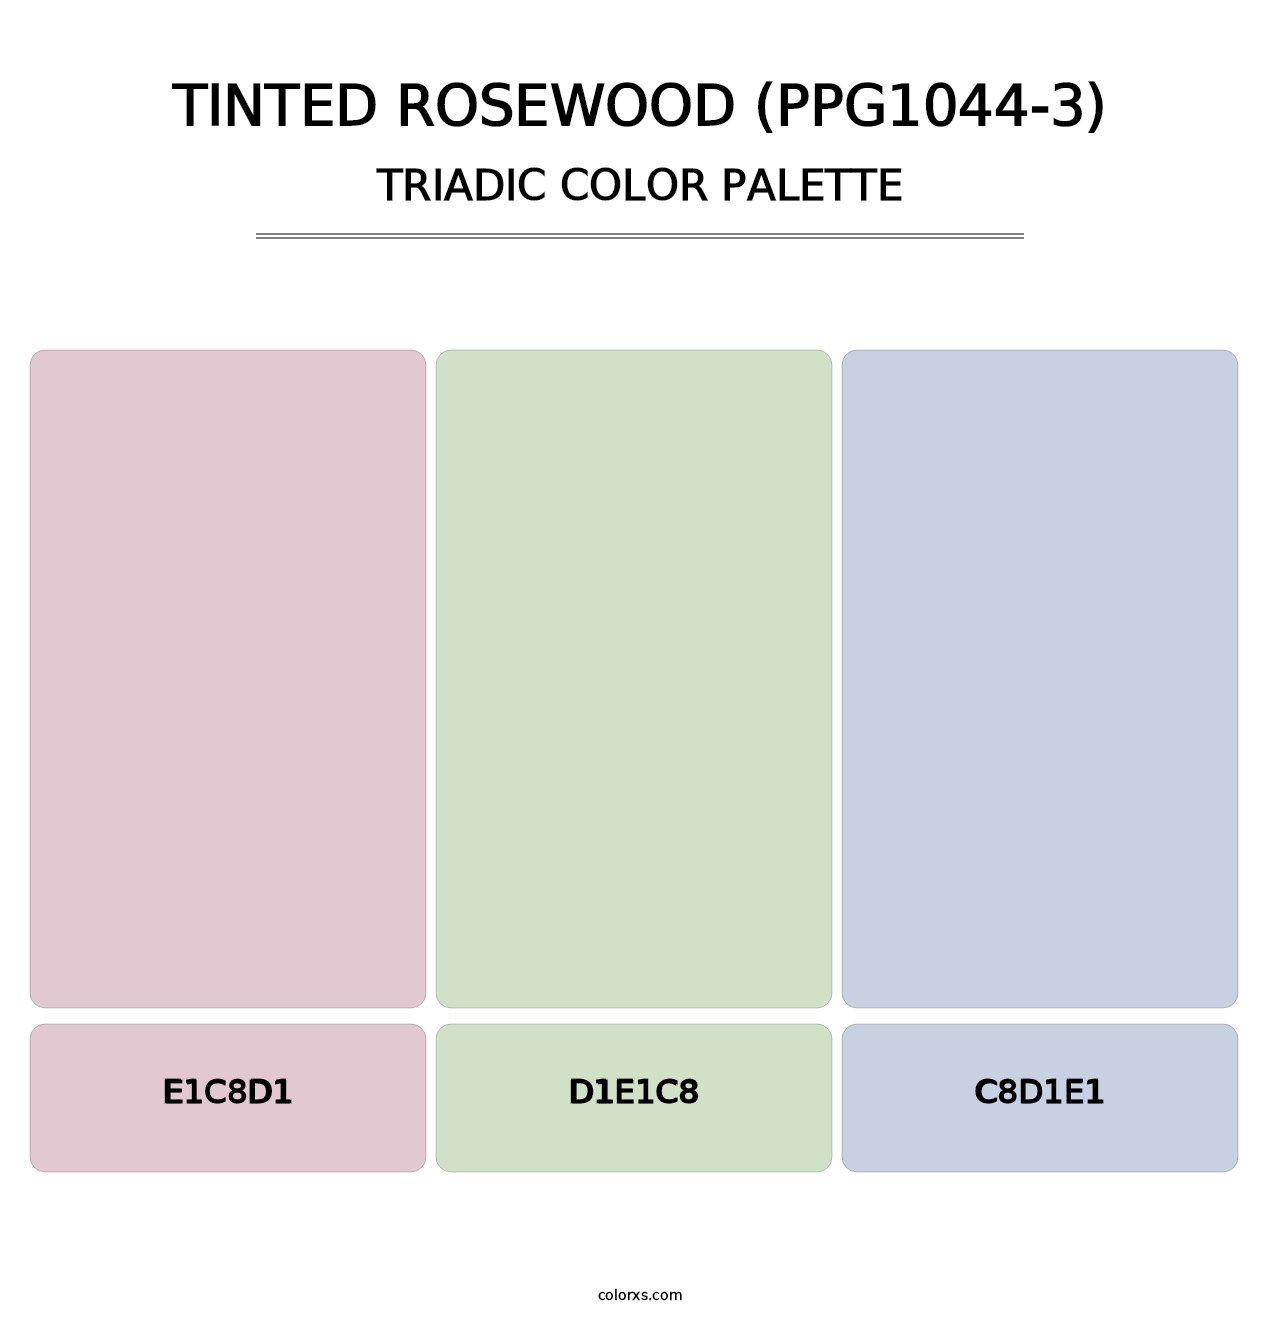 Tinted Rosewood (PPG1044-3) - Triadic Color Palette